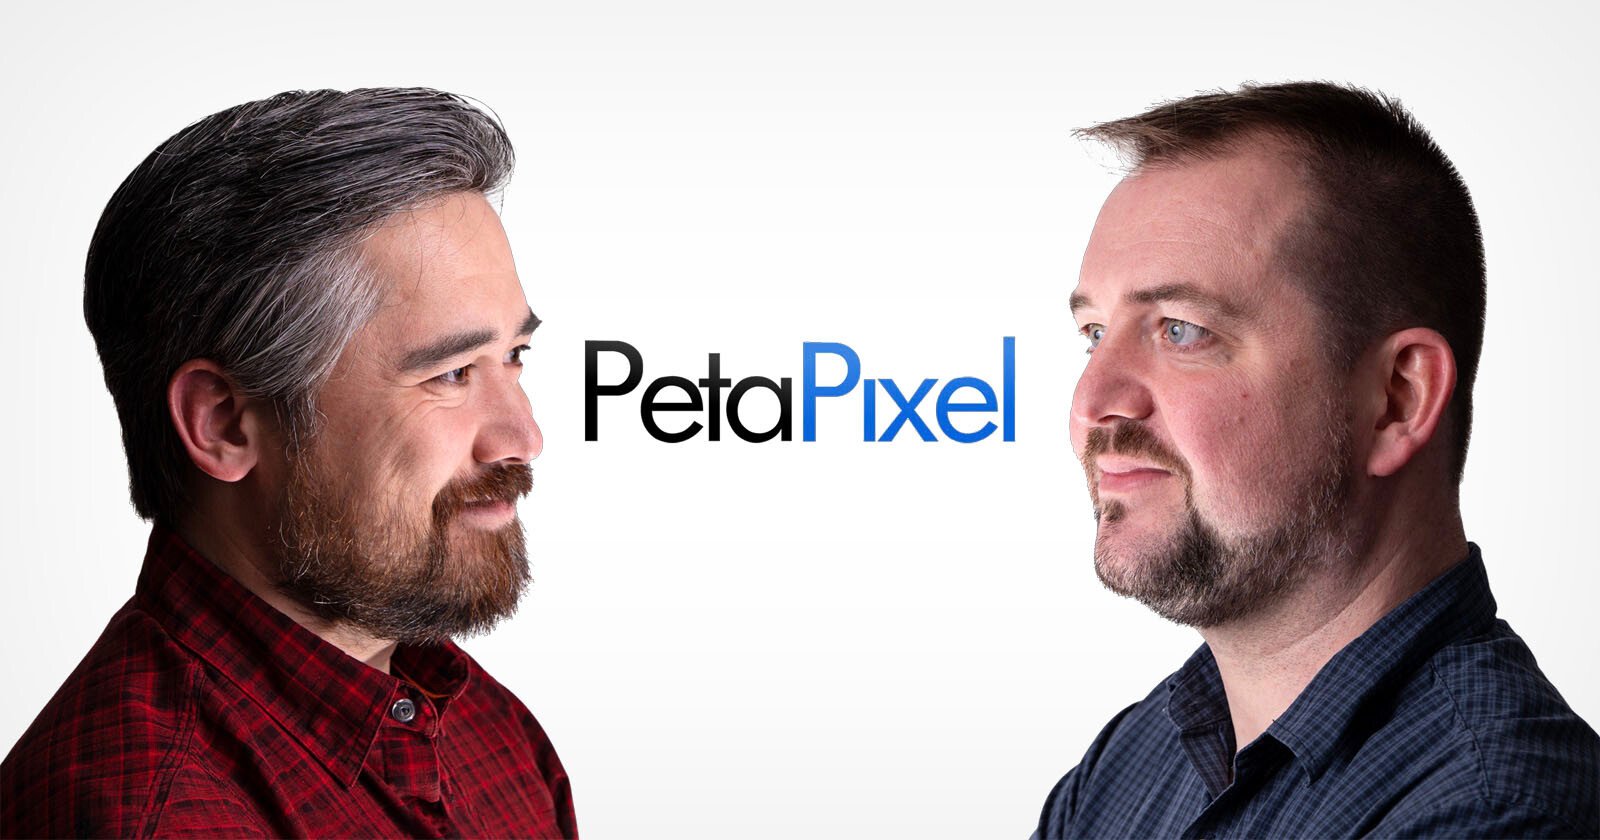 Chris Niccolls and Jordan Drake Join PetaPixel to Lead its YouTube Channel